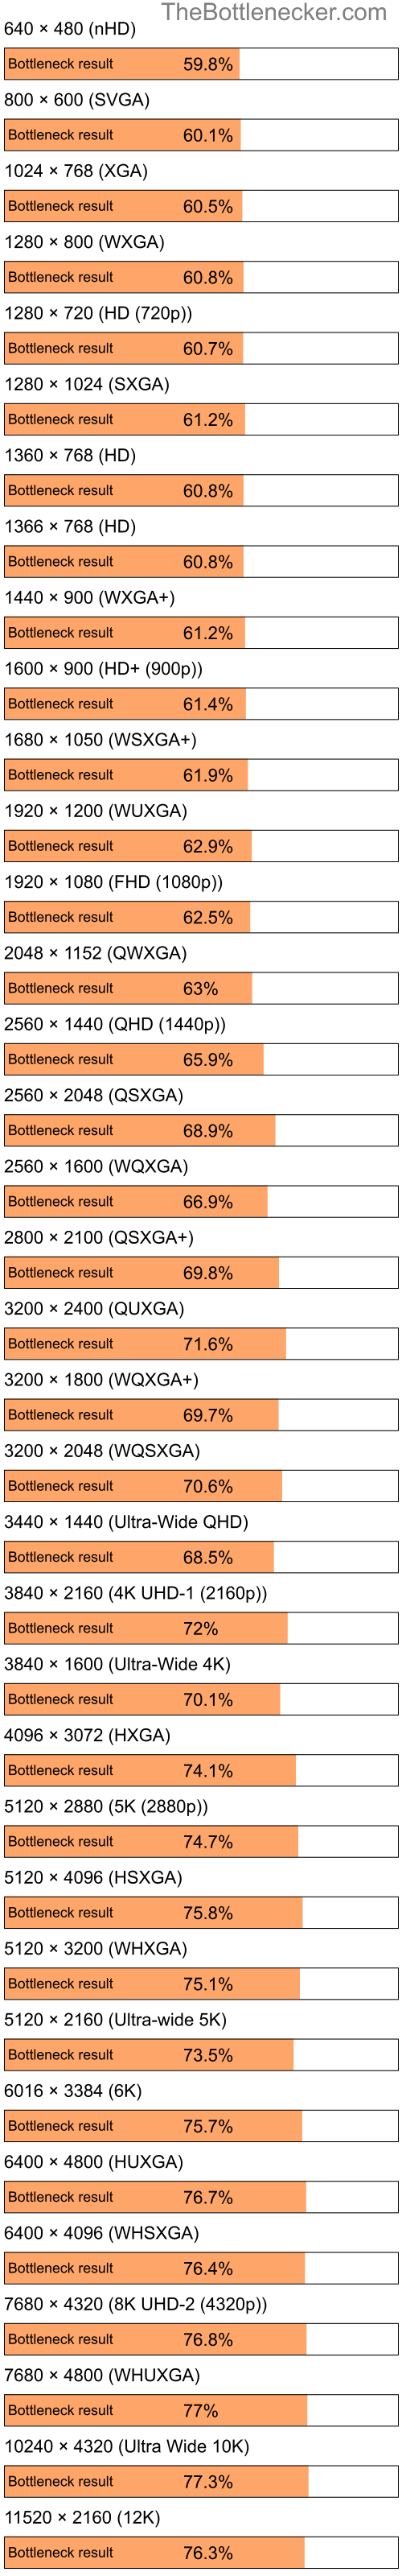 Bottleneck results by resolution for Intel Pentium 4 and AMD Mobility Radeon X1700 in General Tasks